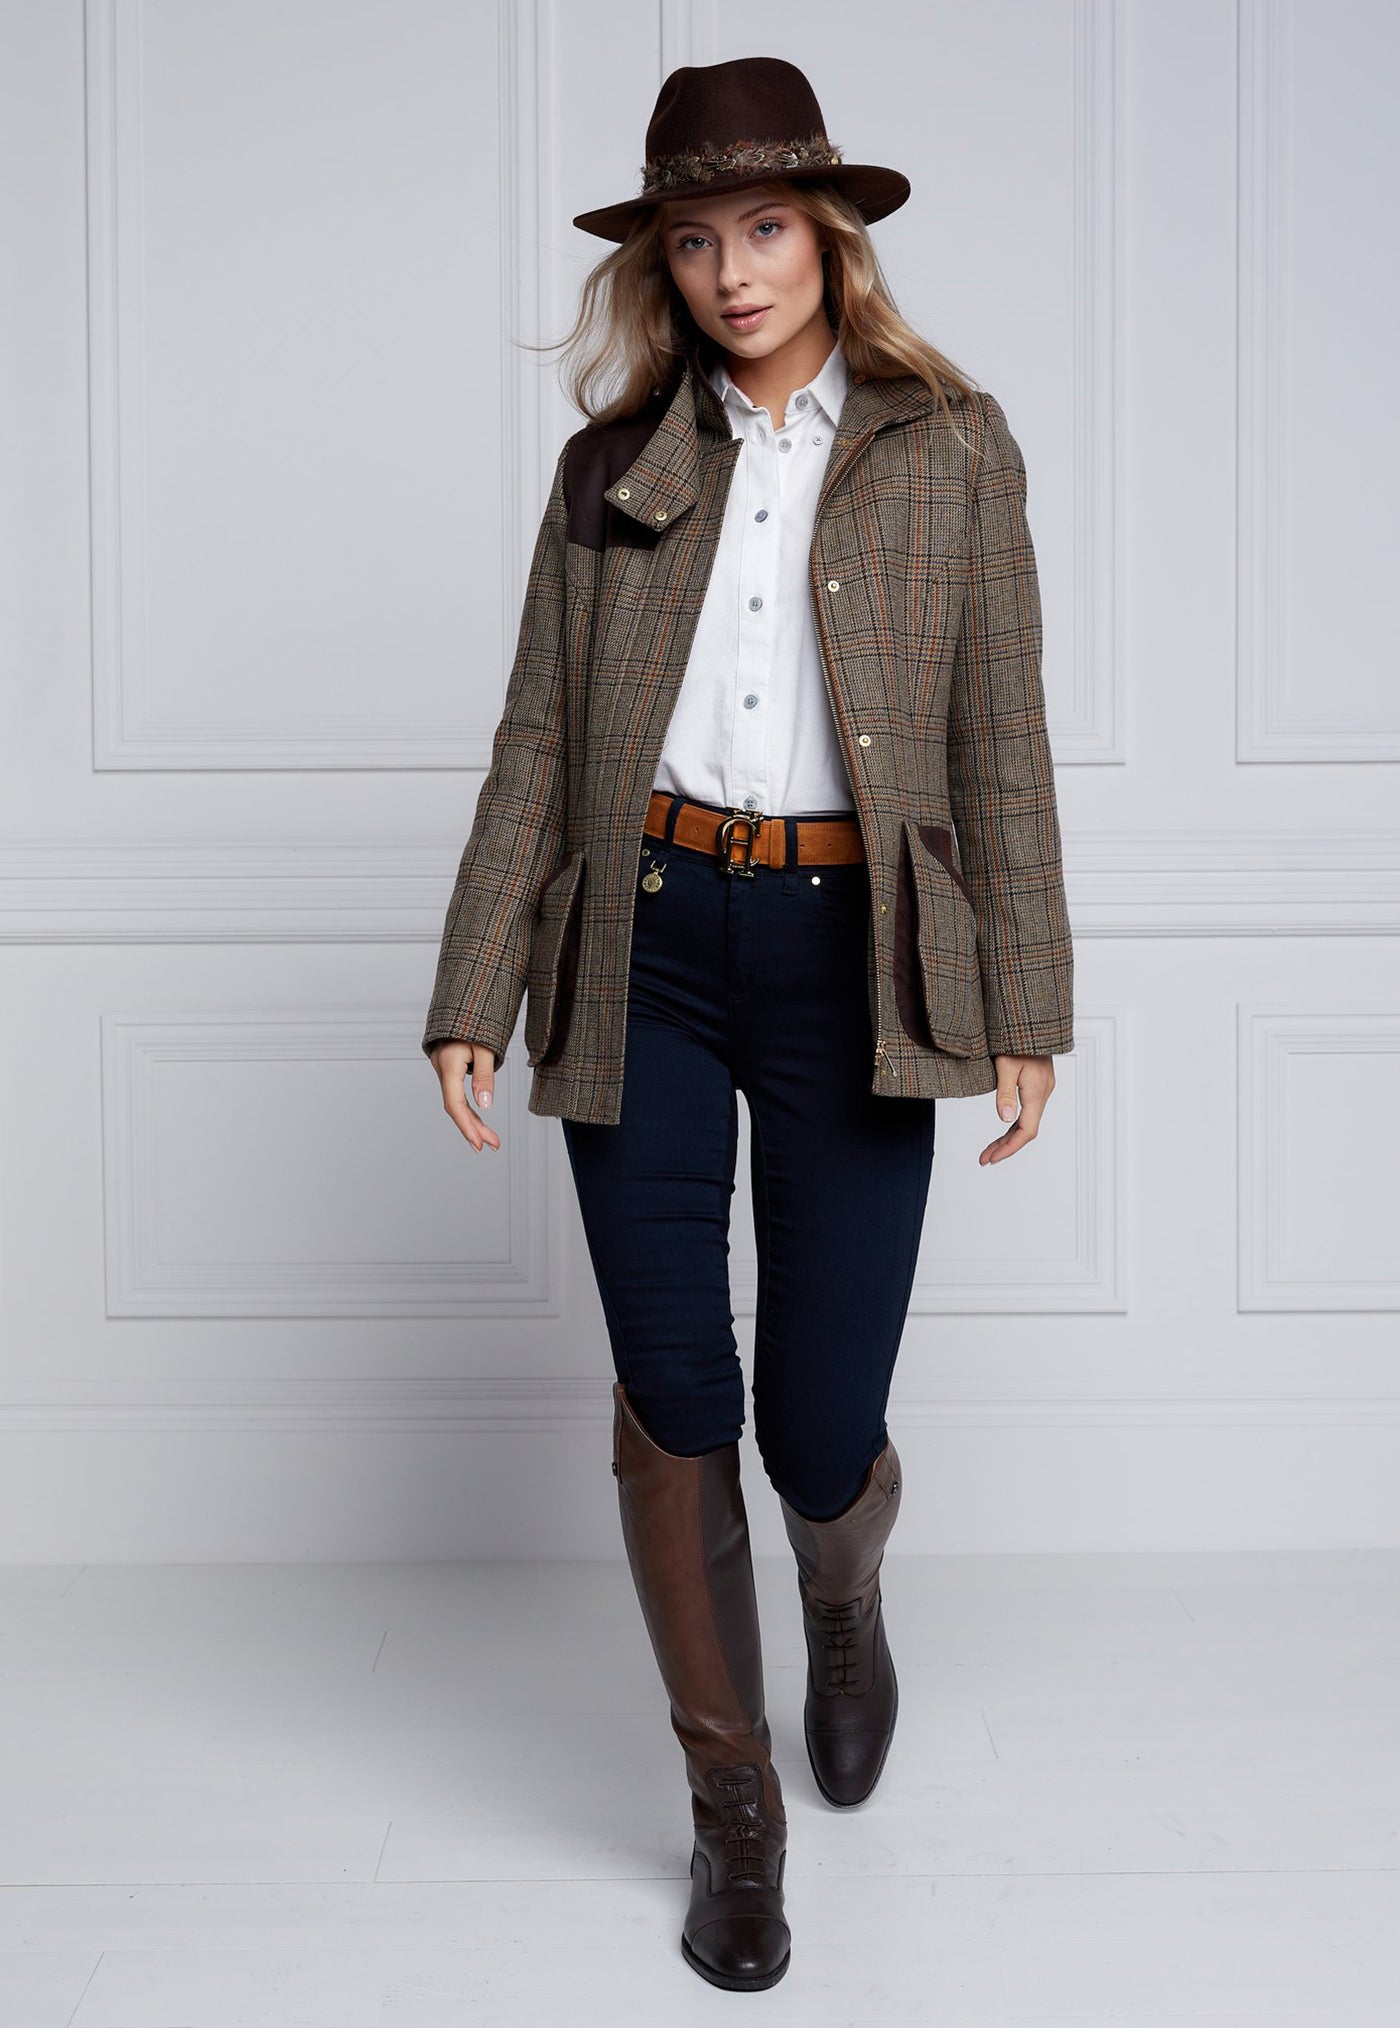 Country Classic Jacket - Bourbon Tweed sold by Angel Divine